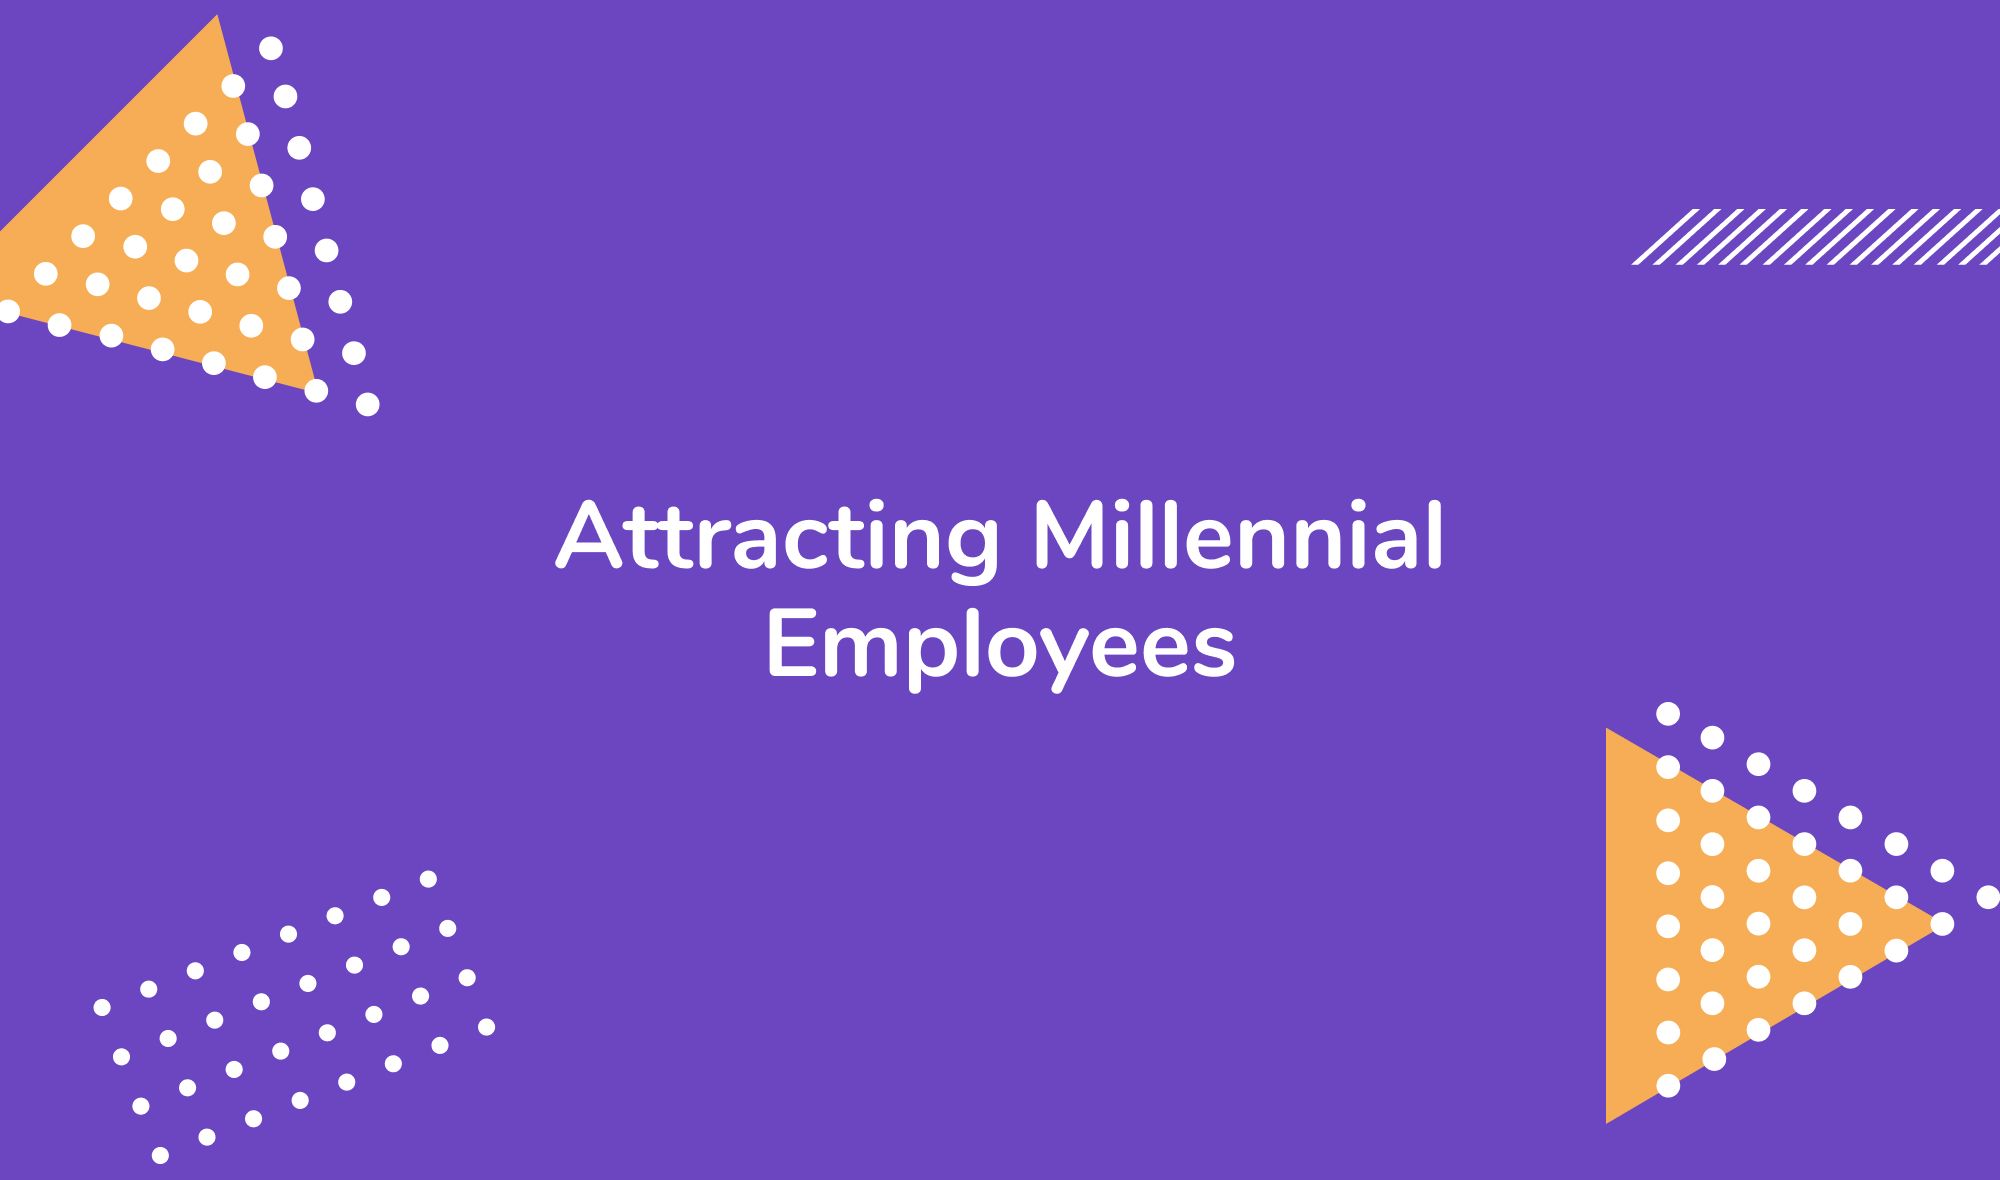 Attracting Millennial Employees